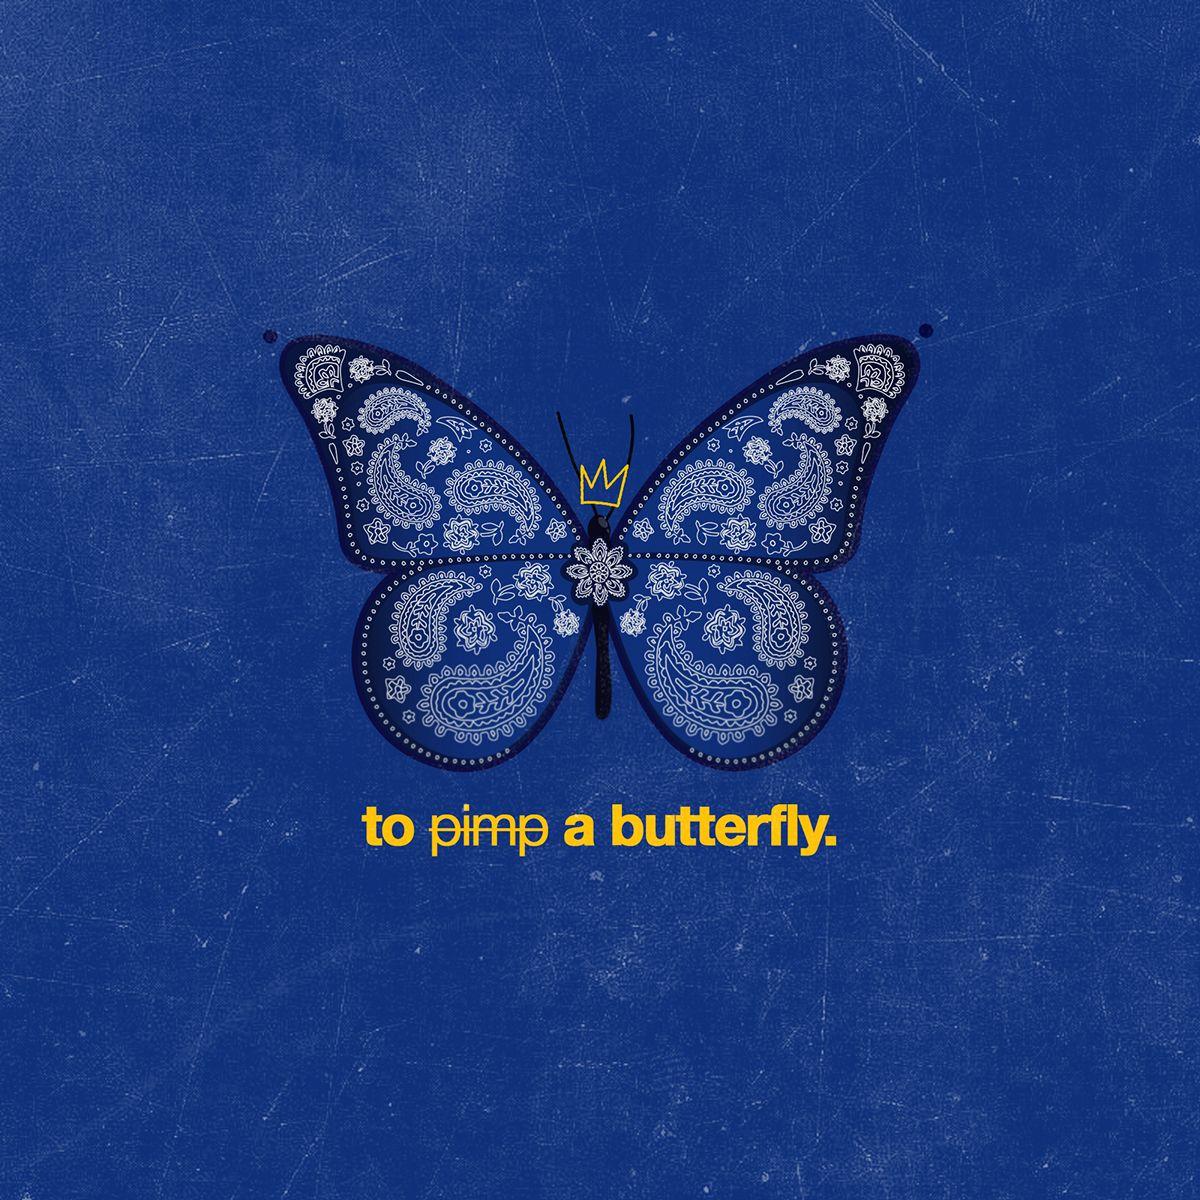 To pimp a butterfly. Pimp a Butterfly. Бабочка Кендрик Ламар. Kendrick Lamar to Pimp a Butterfly.